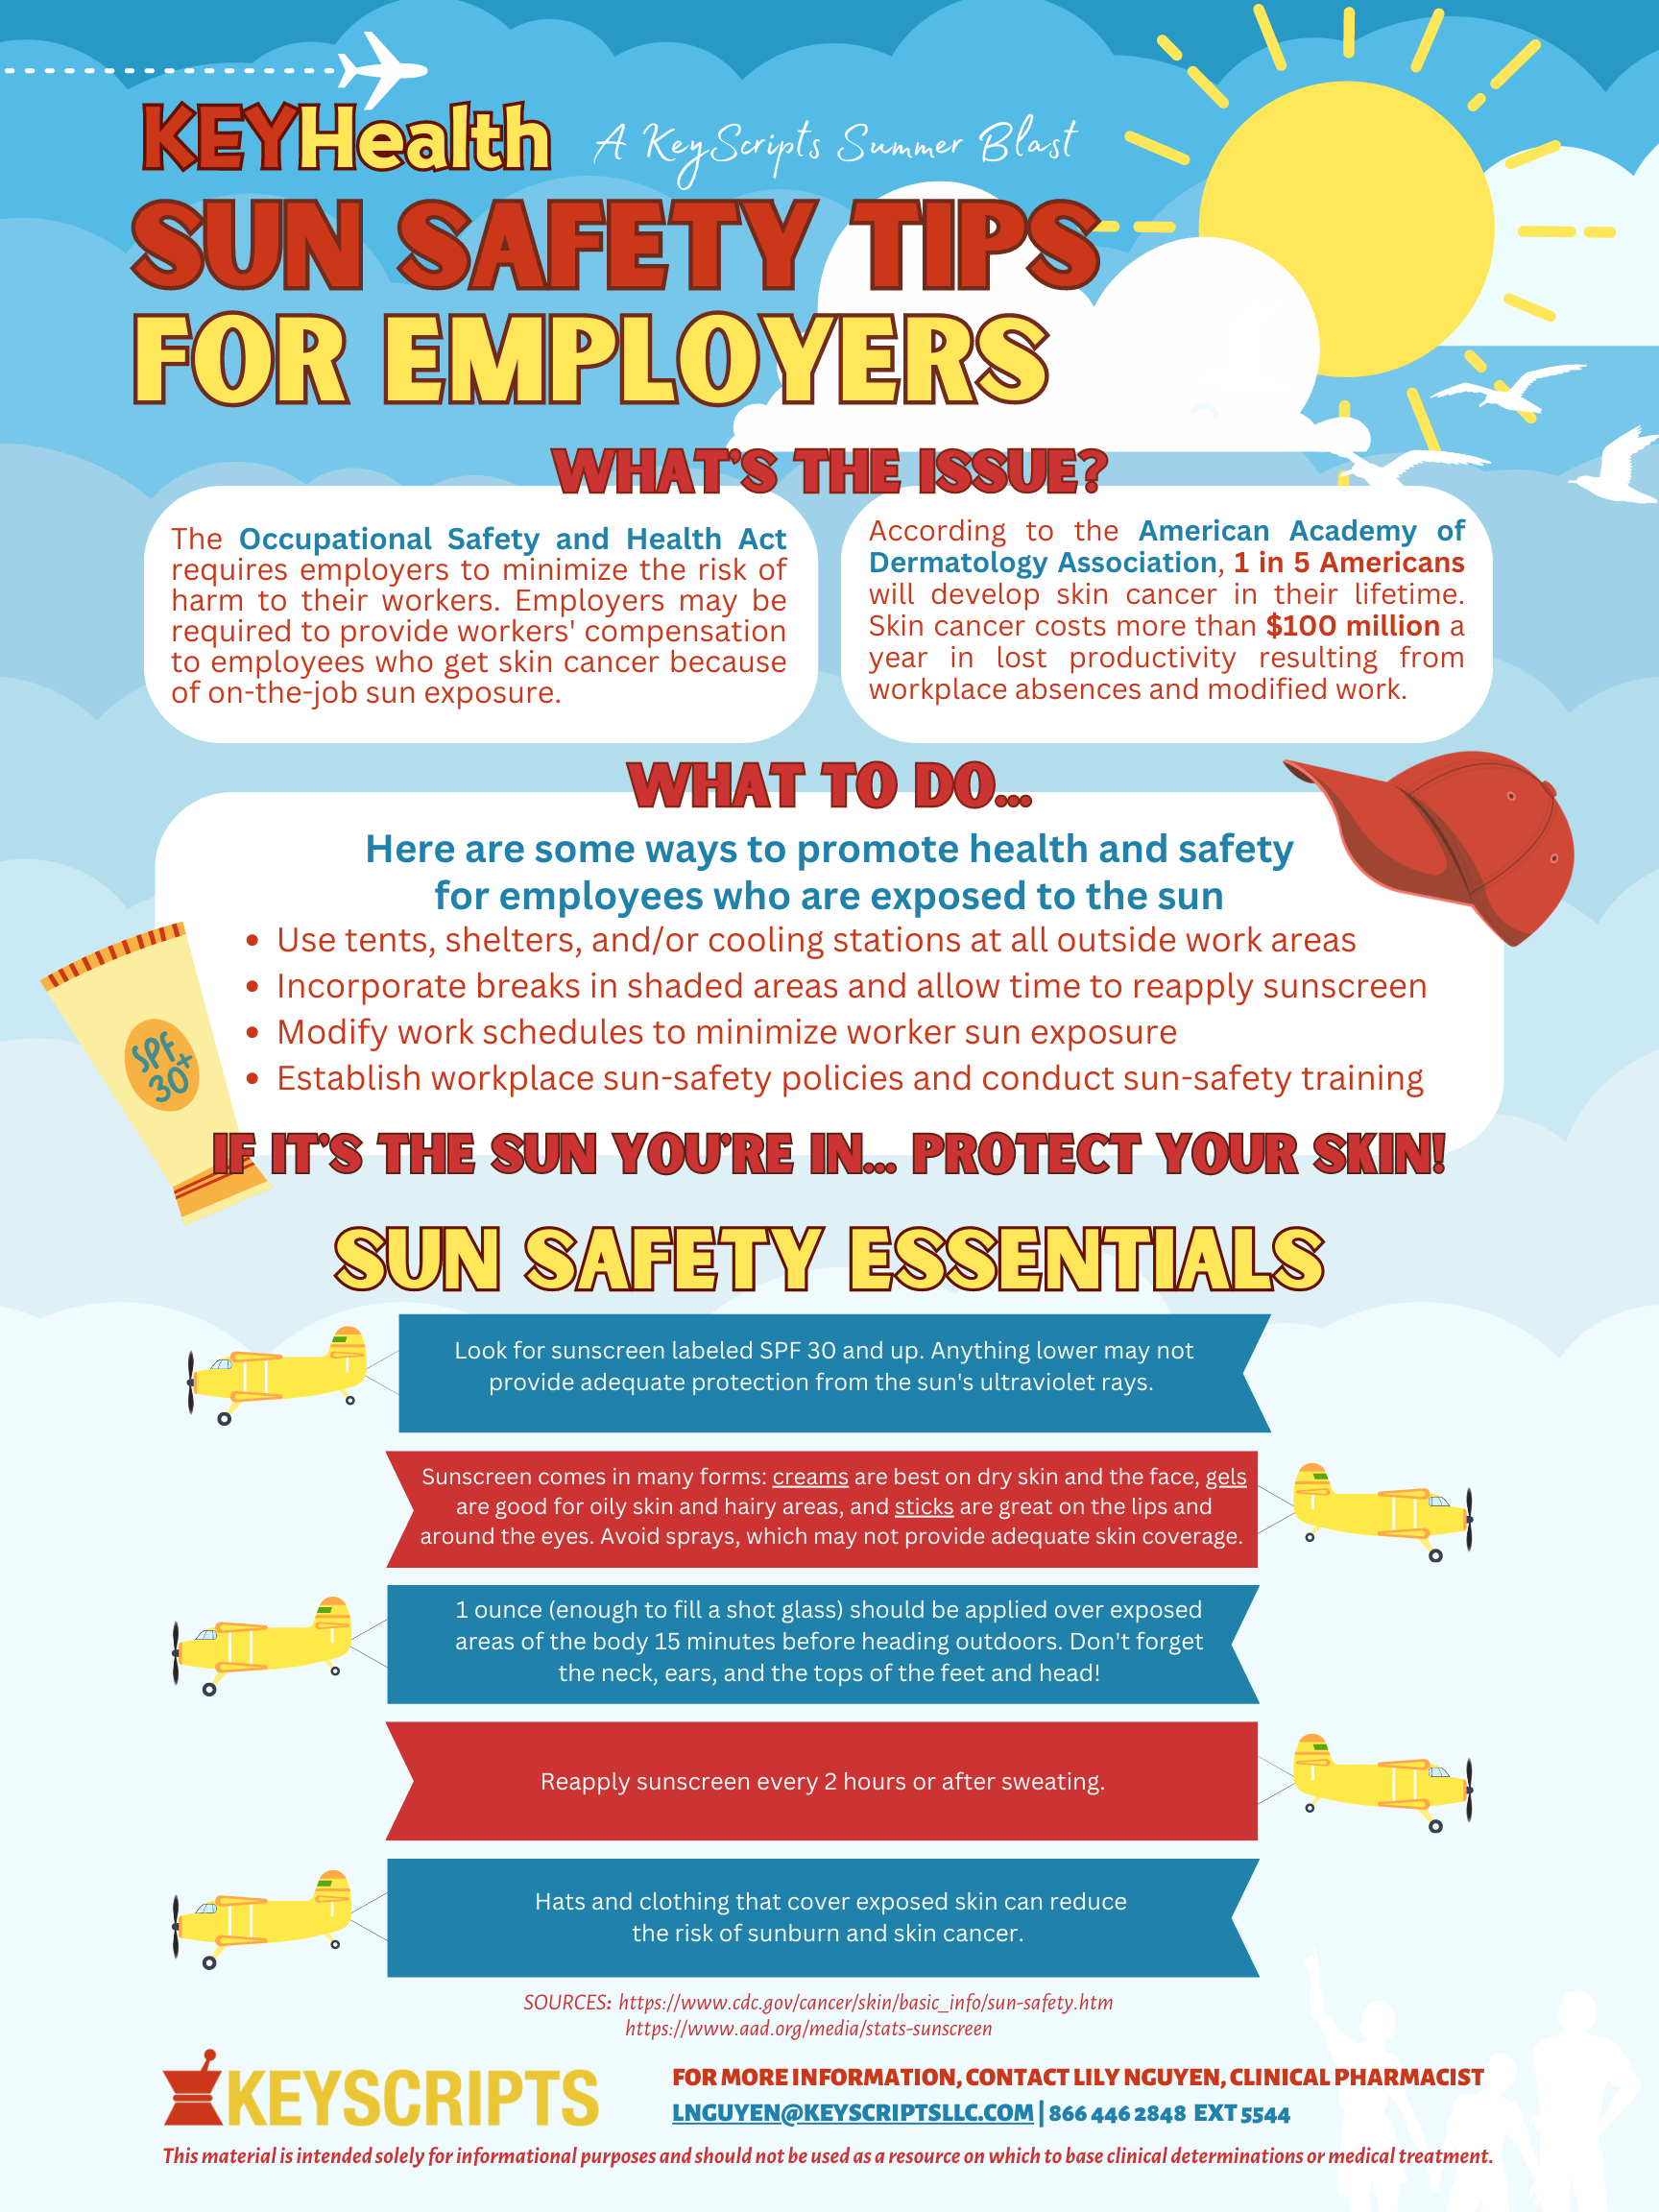 Sun Safety Tips for Employers